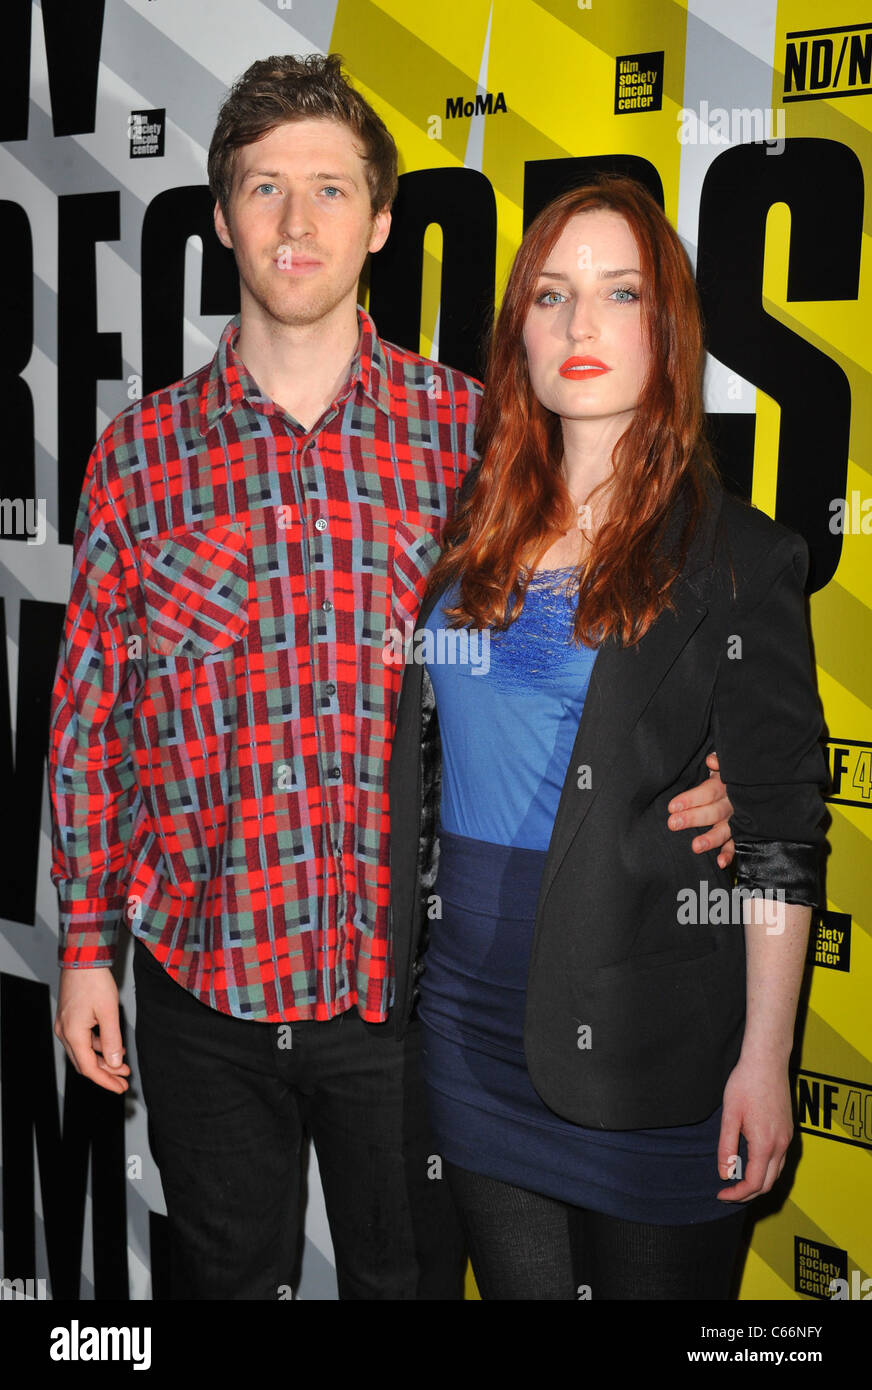 Daryl Wein, Zoe Lister-Jones at arrivals for MARGIN CALL Premiere, MoMA Museum of Modern Art, New York, NY March 23, 2011. Photo By: Gregorio T. Binuya/Everett Collection Stock Photo